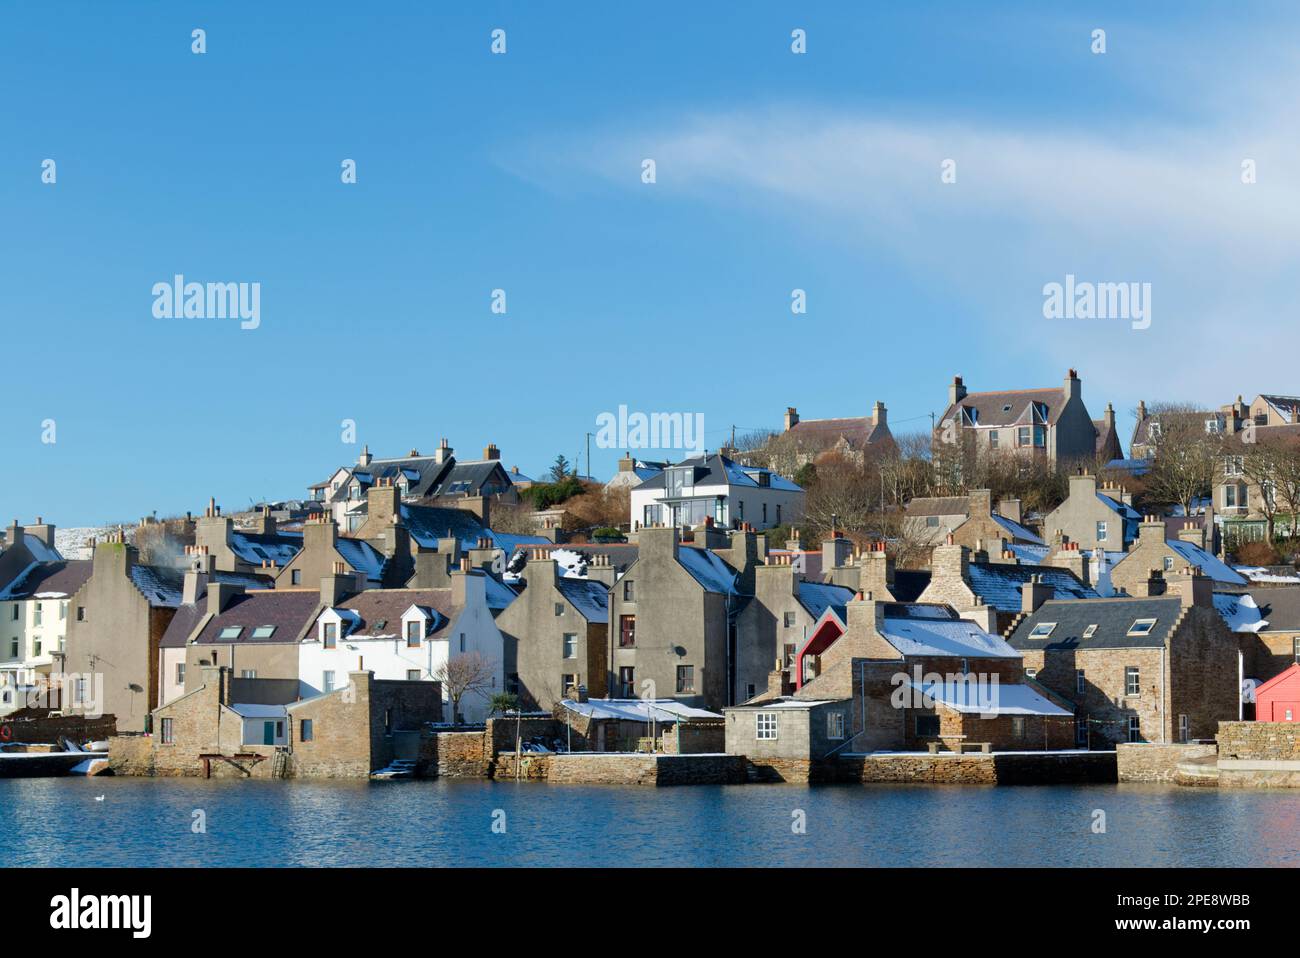 Houses along Stromness waterfront, Orkney Isles Stock Photo